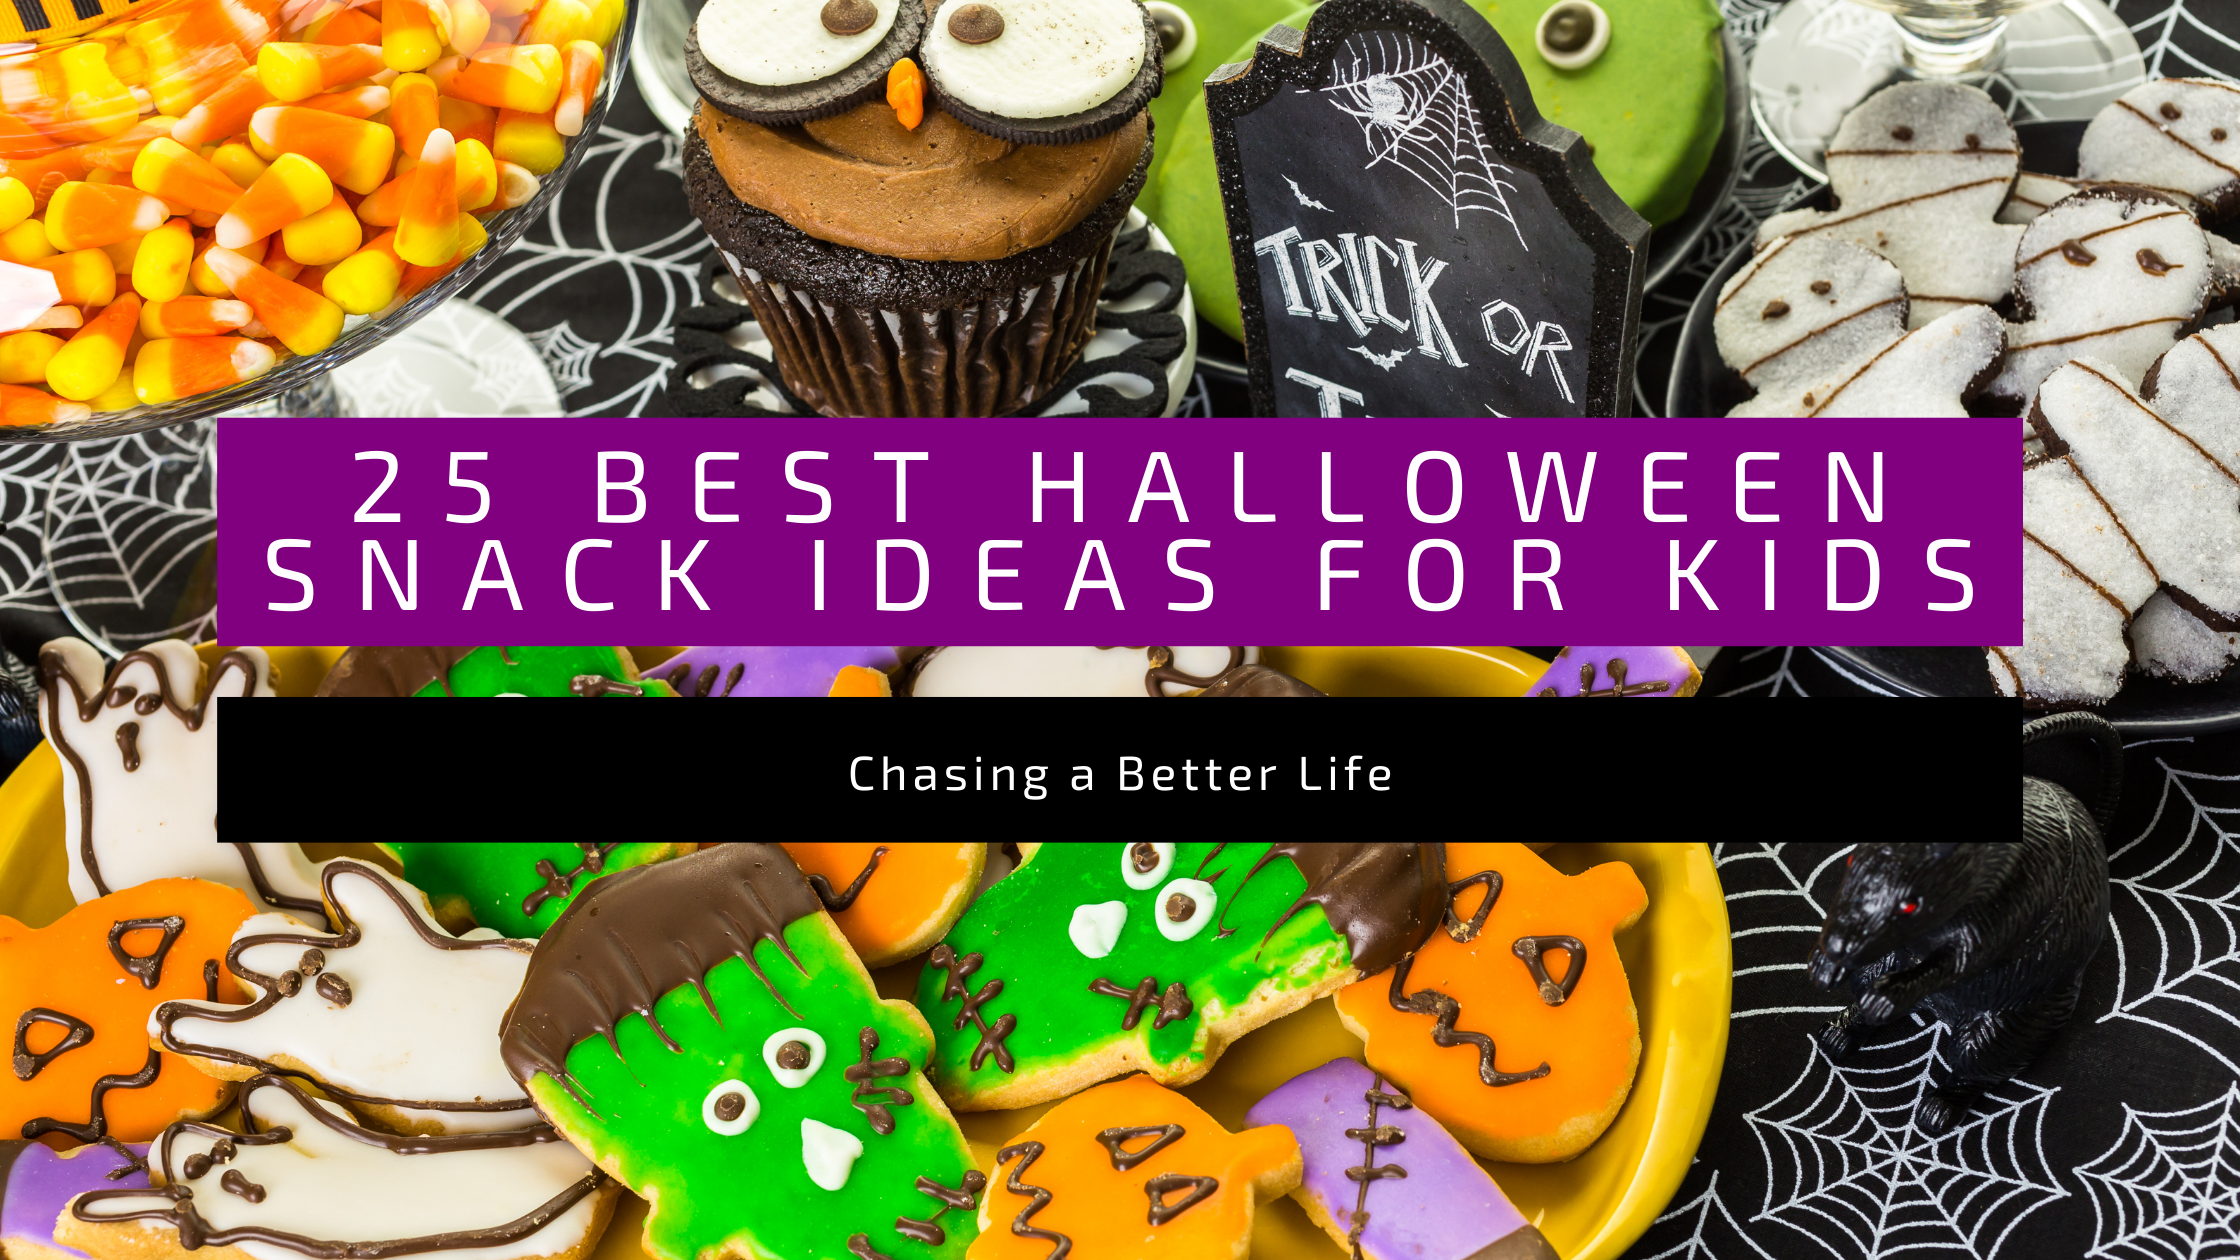 The 25 Best Halloween Snack Ideas for Kids 34